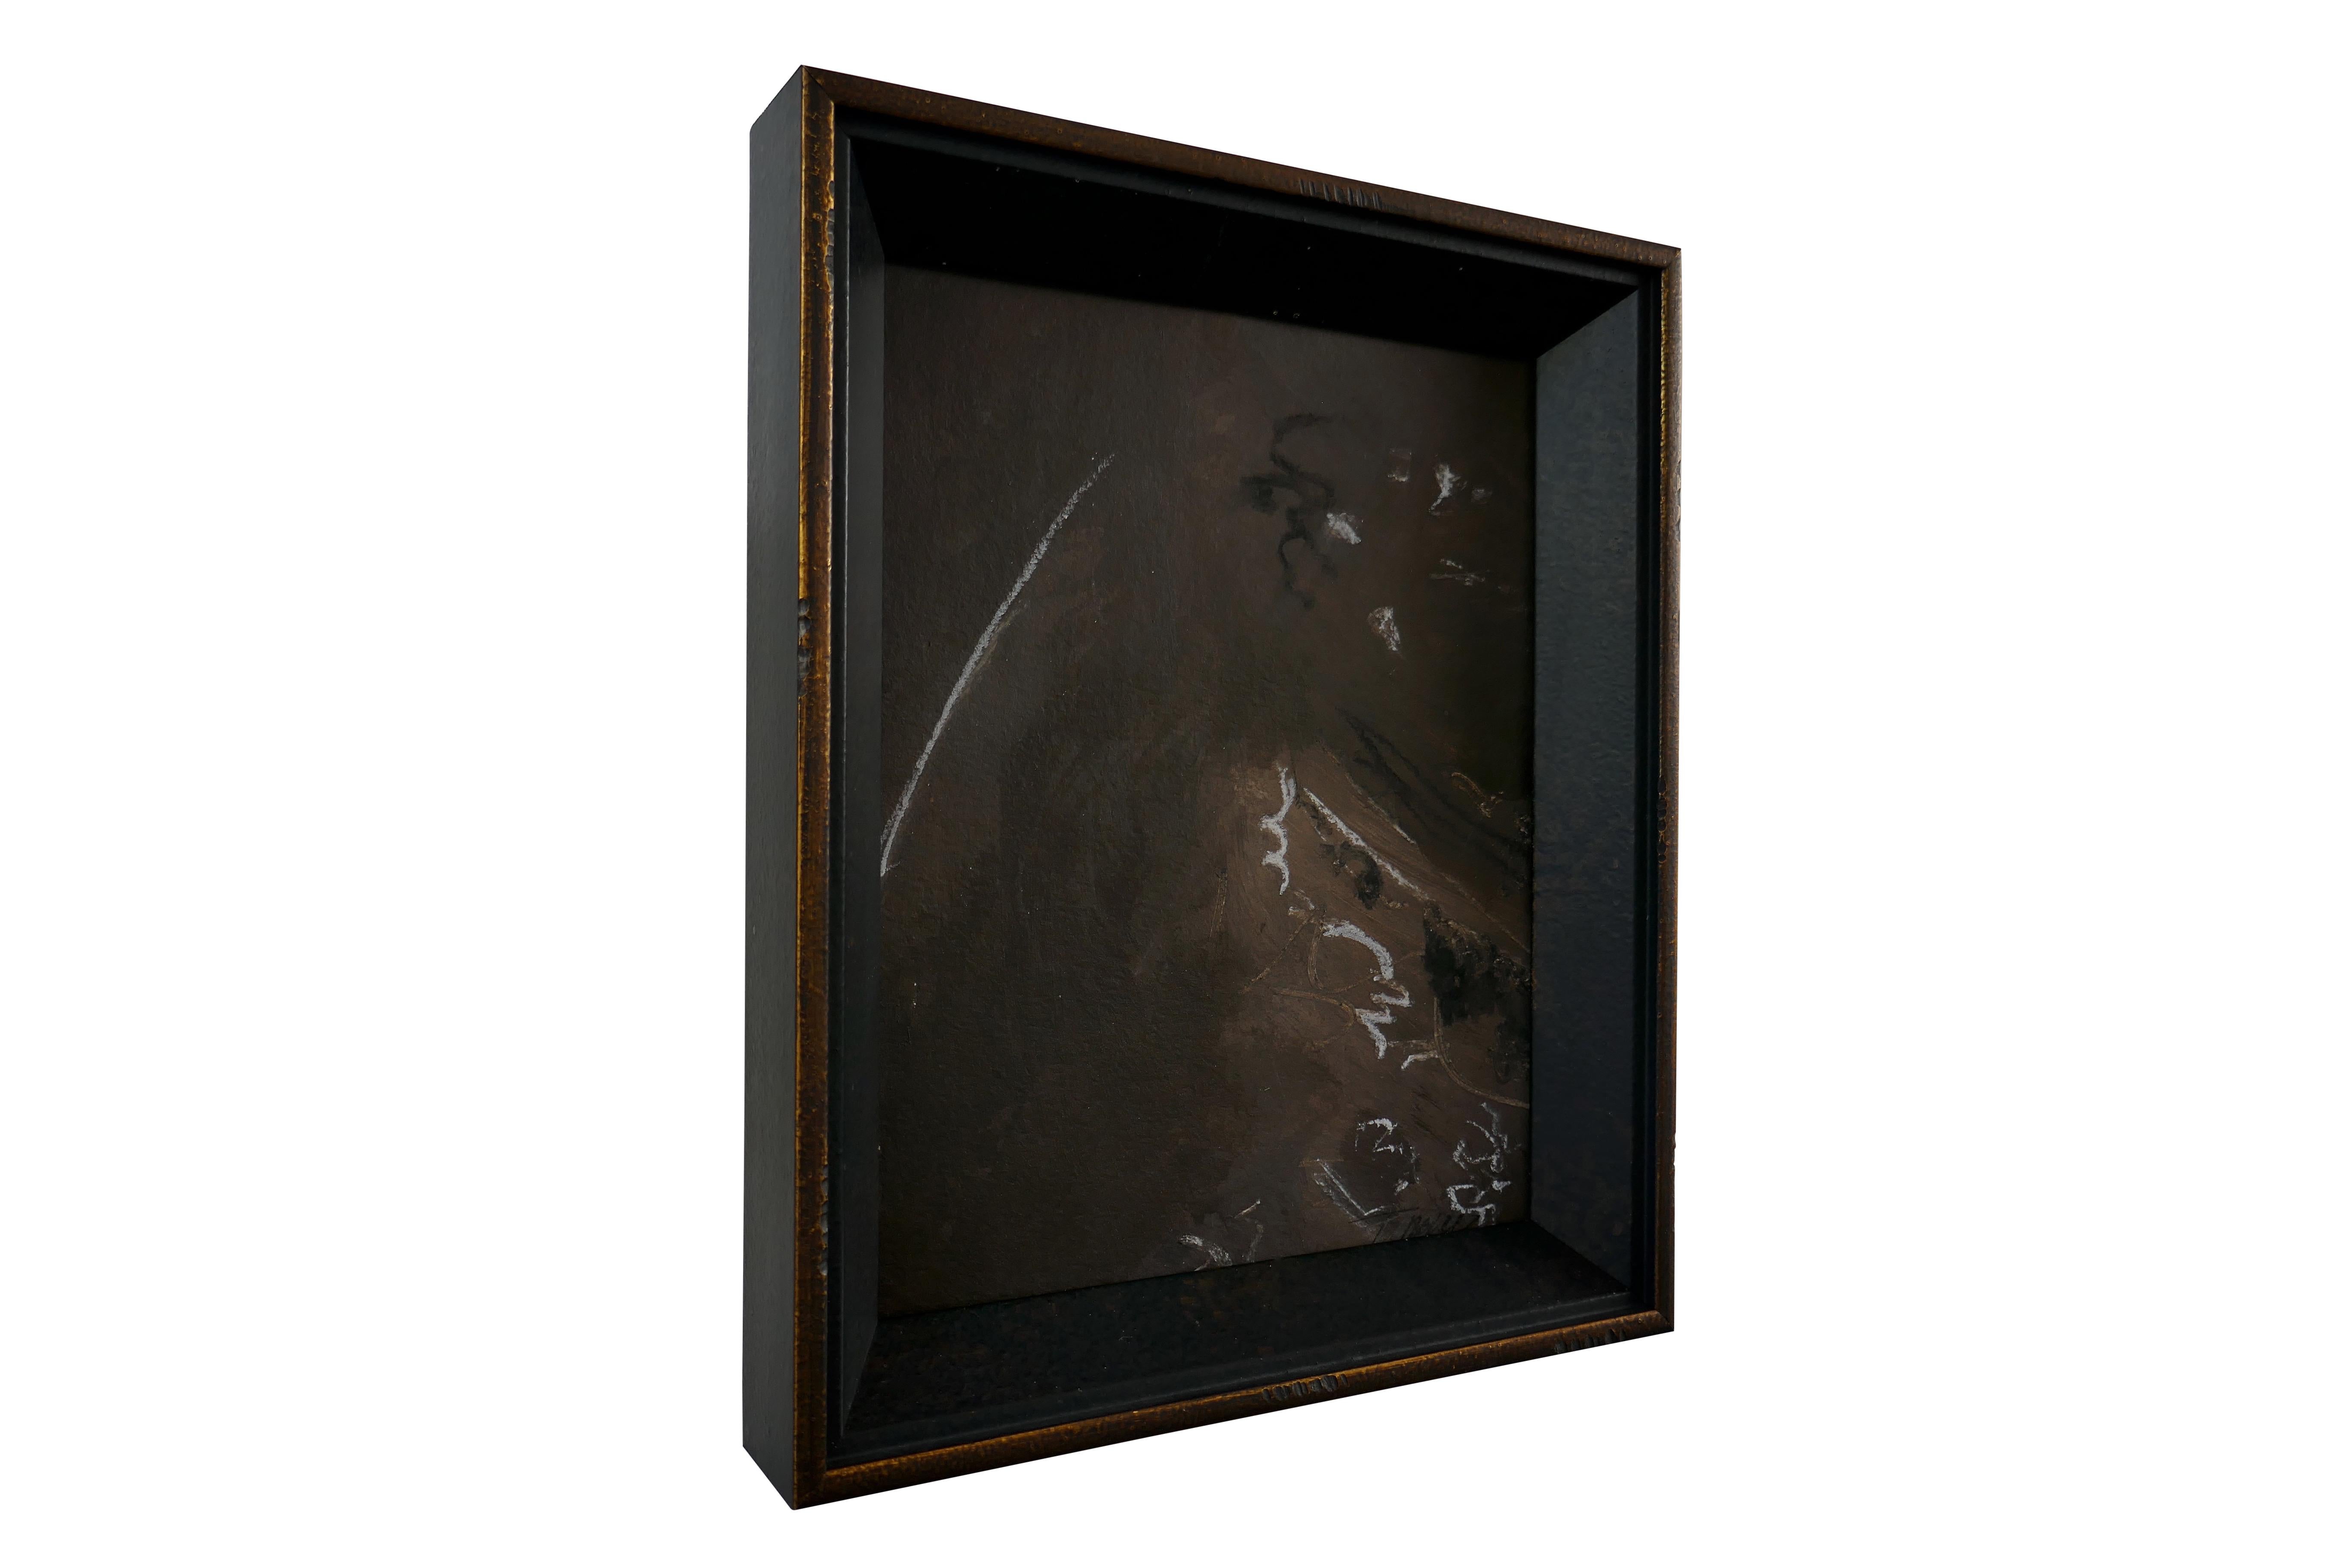 FI Gallery original one-of-one hand created & signed art piece by Tammy Price. Premium solid wood glass encased frame in matte black with gold tone detailing. Multi shades predominantly of earthy terrain brown's. Mediums of acrylic, ink and